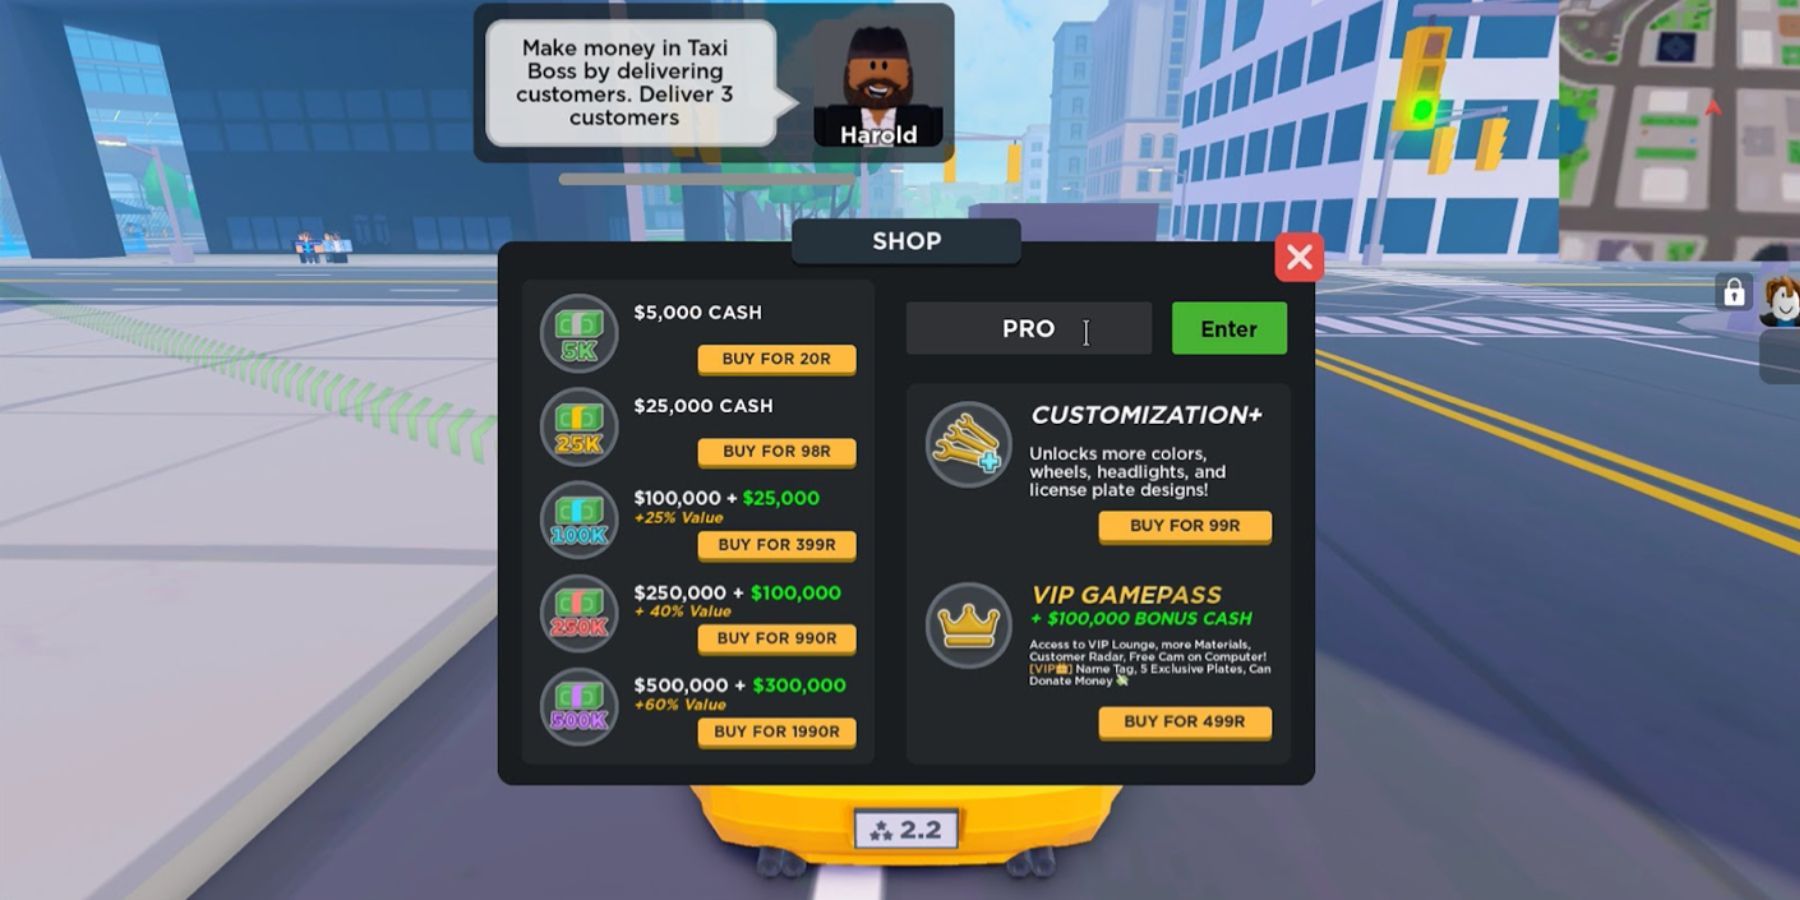 Roblox Taxi Boss: the codes tab